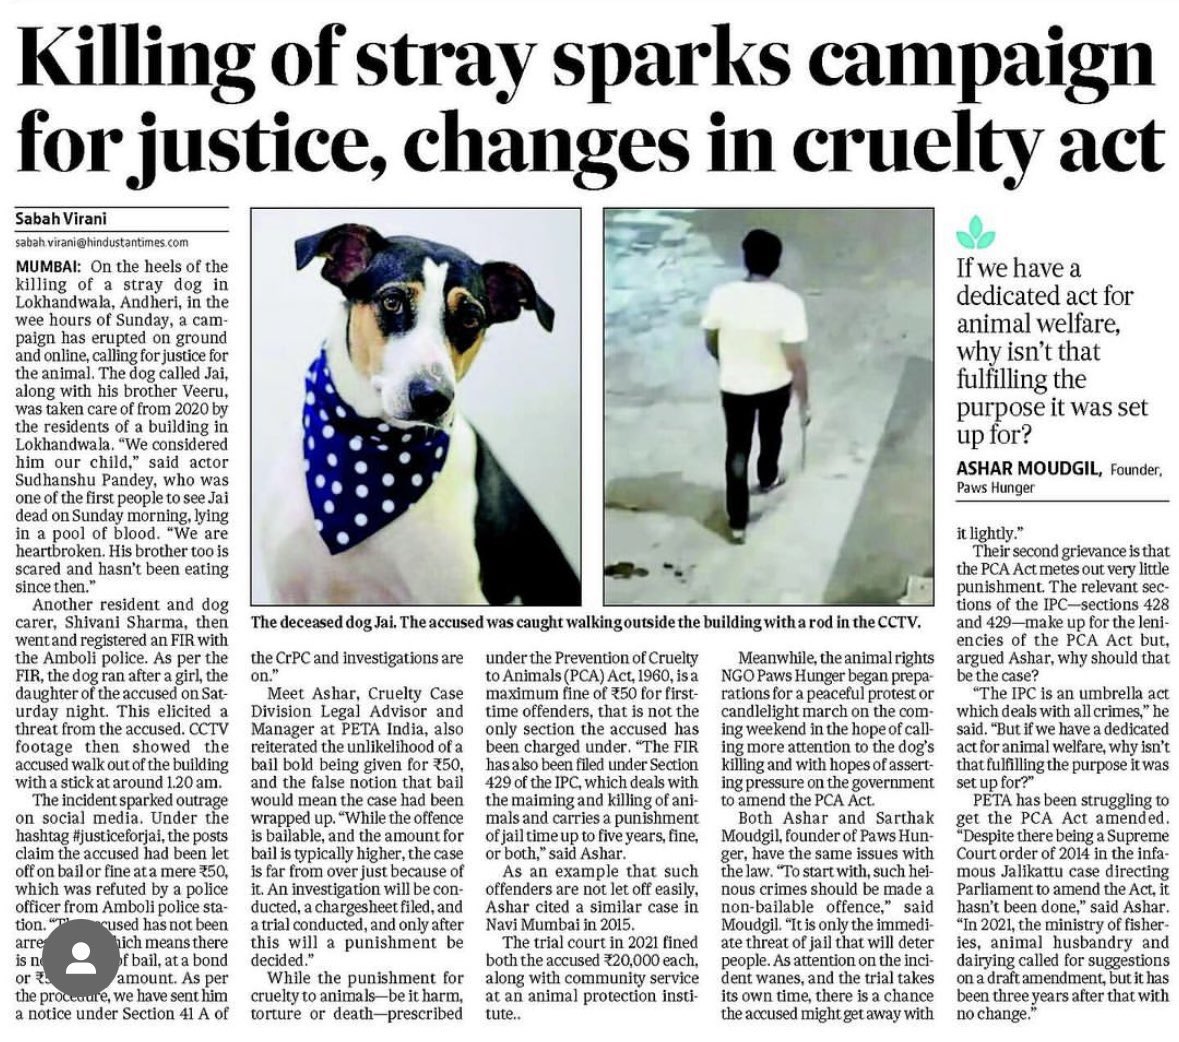 A dog who was beaten to death by a flat owner in a posh locality in Andheri West Mumbai. Run free sweet child 💔 Laws need to be strengthened so that perpetrators r punished severely for harming innocent souls. Read and share 👇🙏

 #justiceforjai